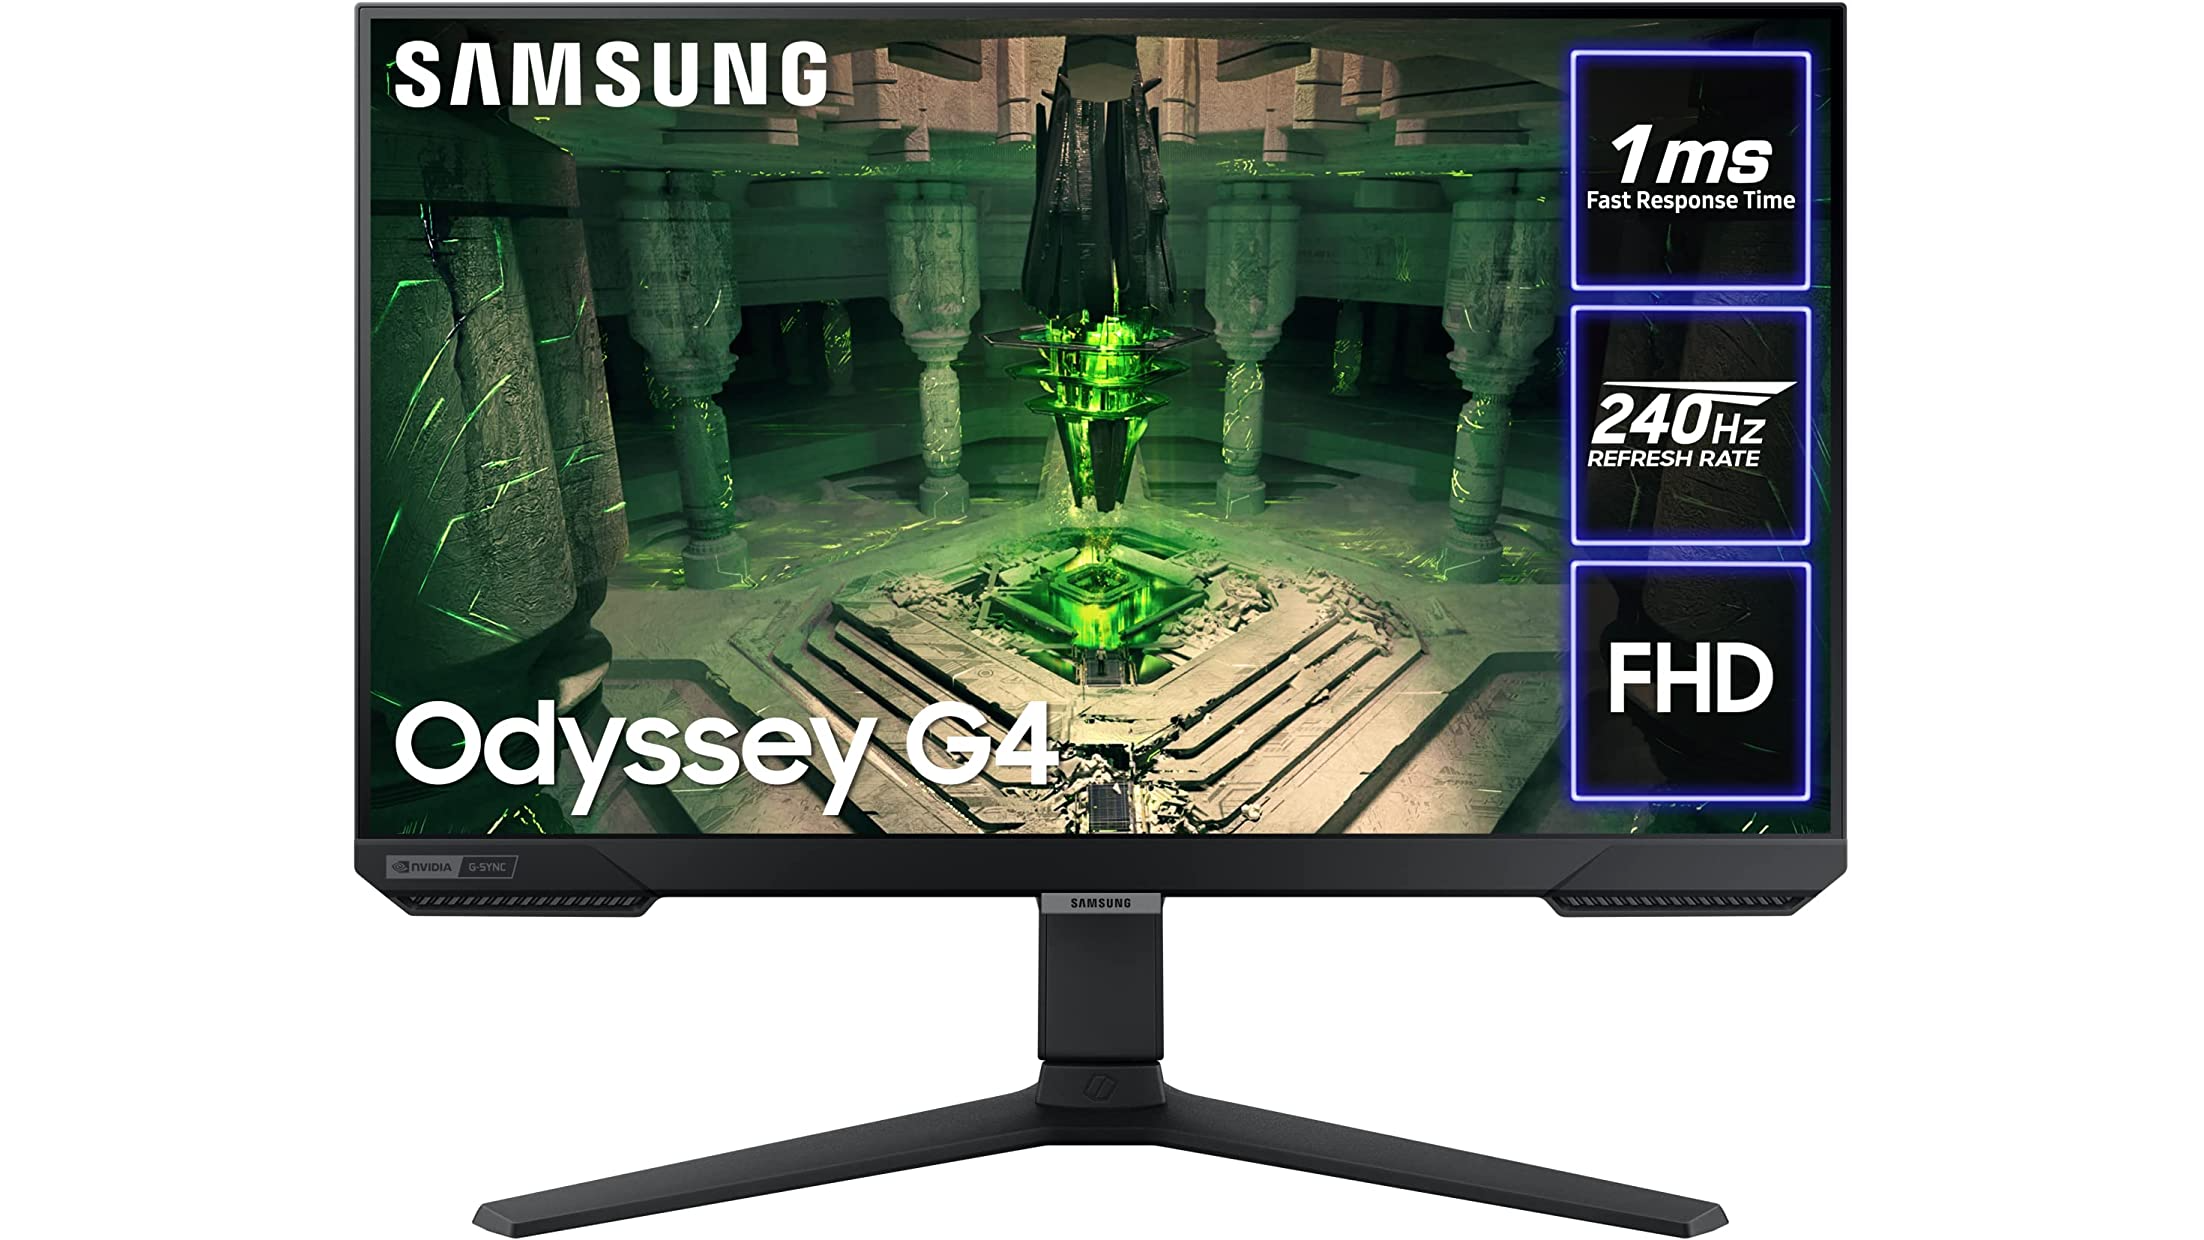 samsung odyssey g4 gaming monitor, with text saying its features (